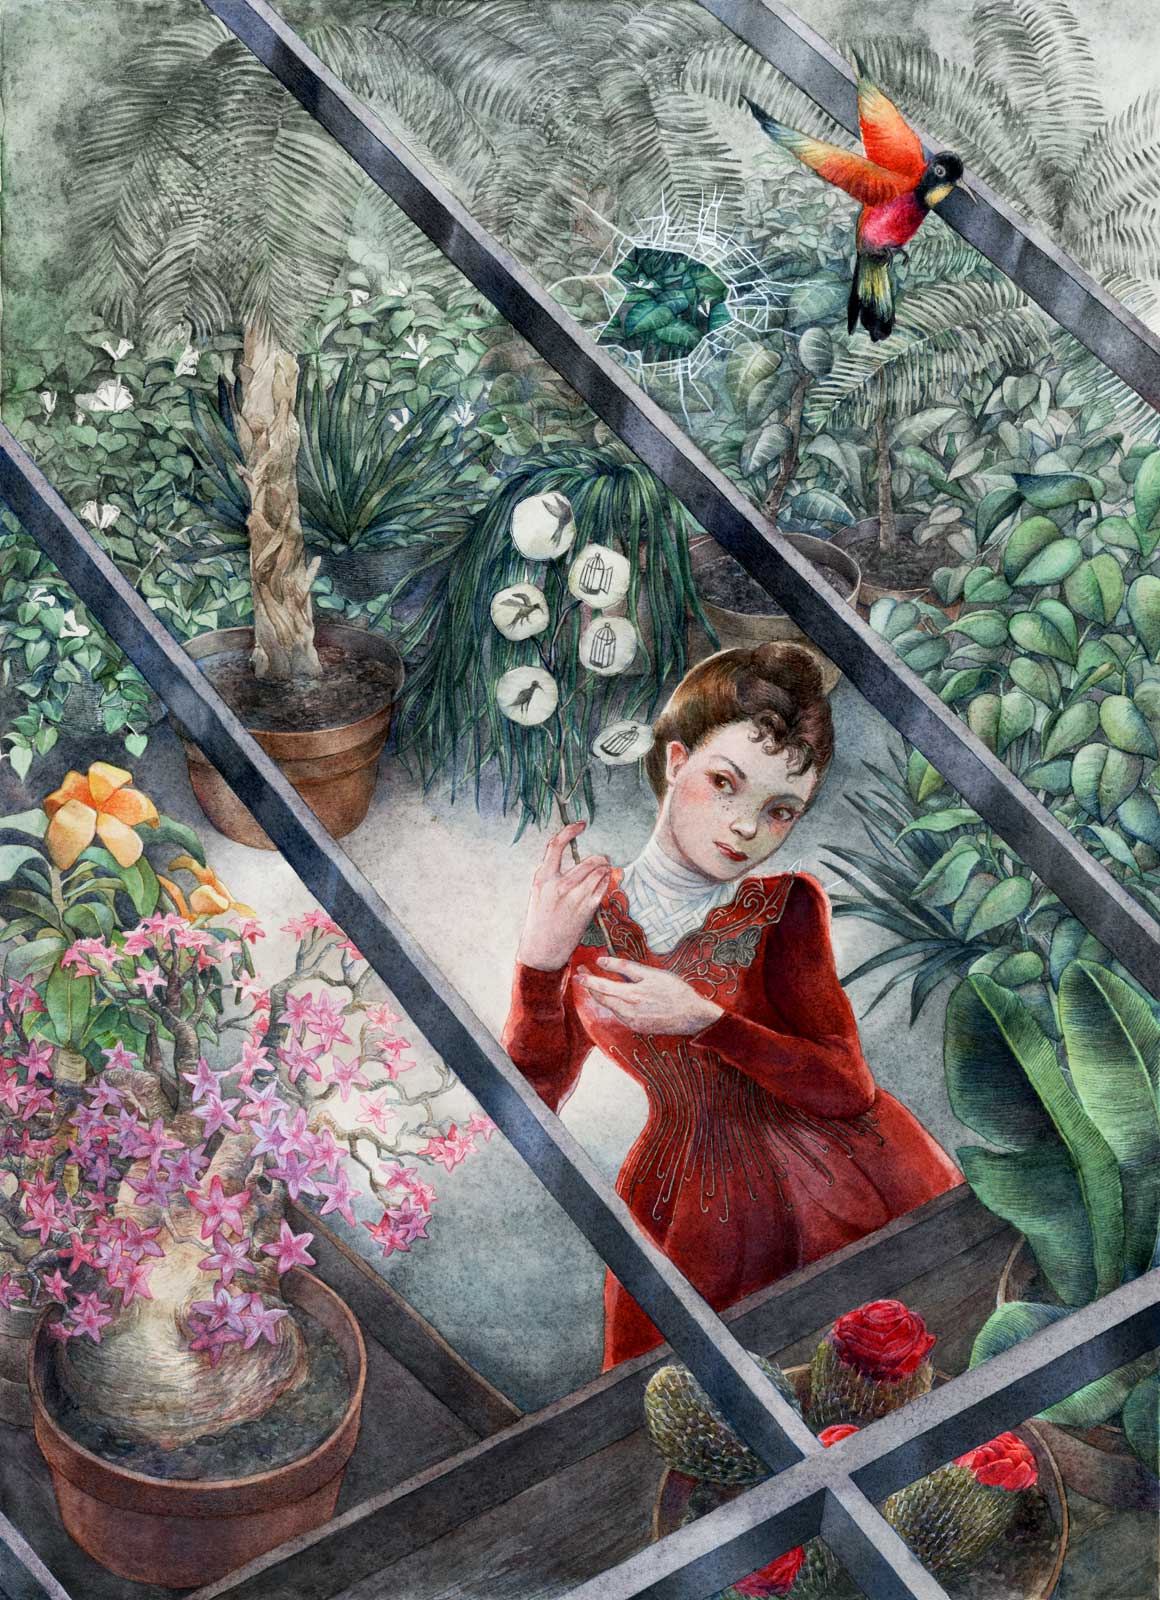 Late victorian lady in a red gown in a greenhouse full of plants holding a lunaria branch on which is represented an animation of a bird breaking free of its cage and even of the greenhouse glasses.